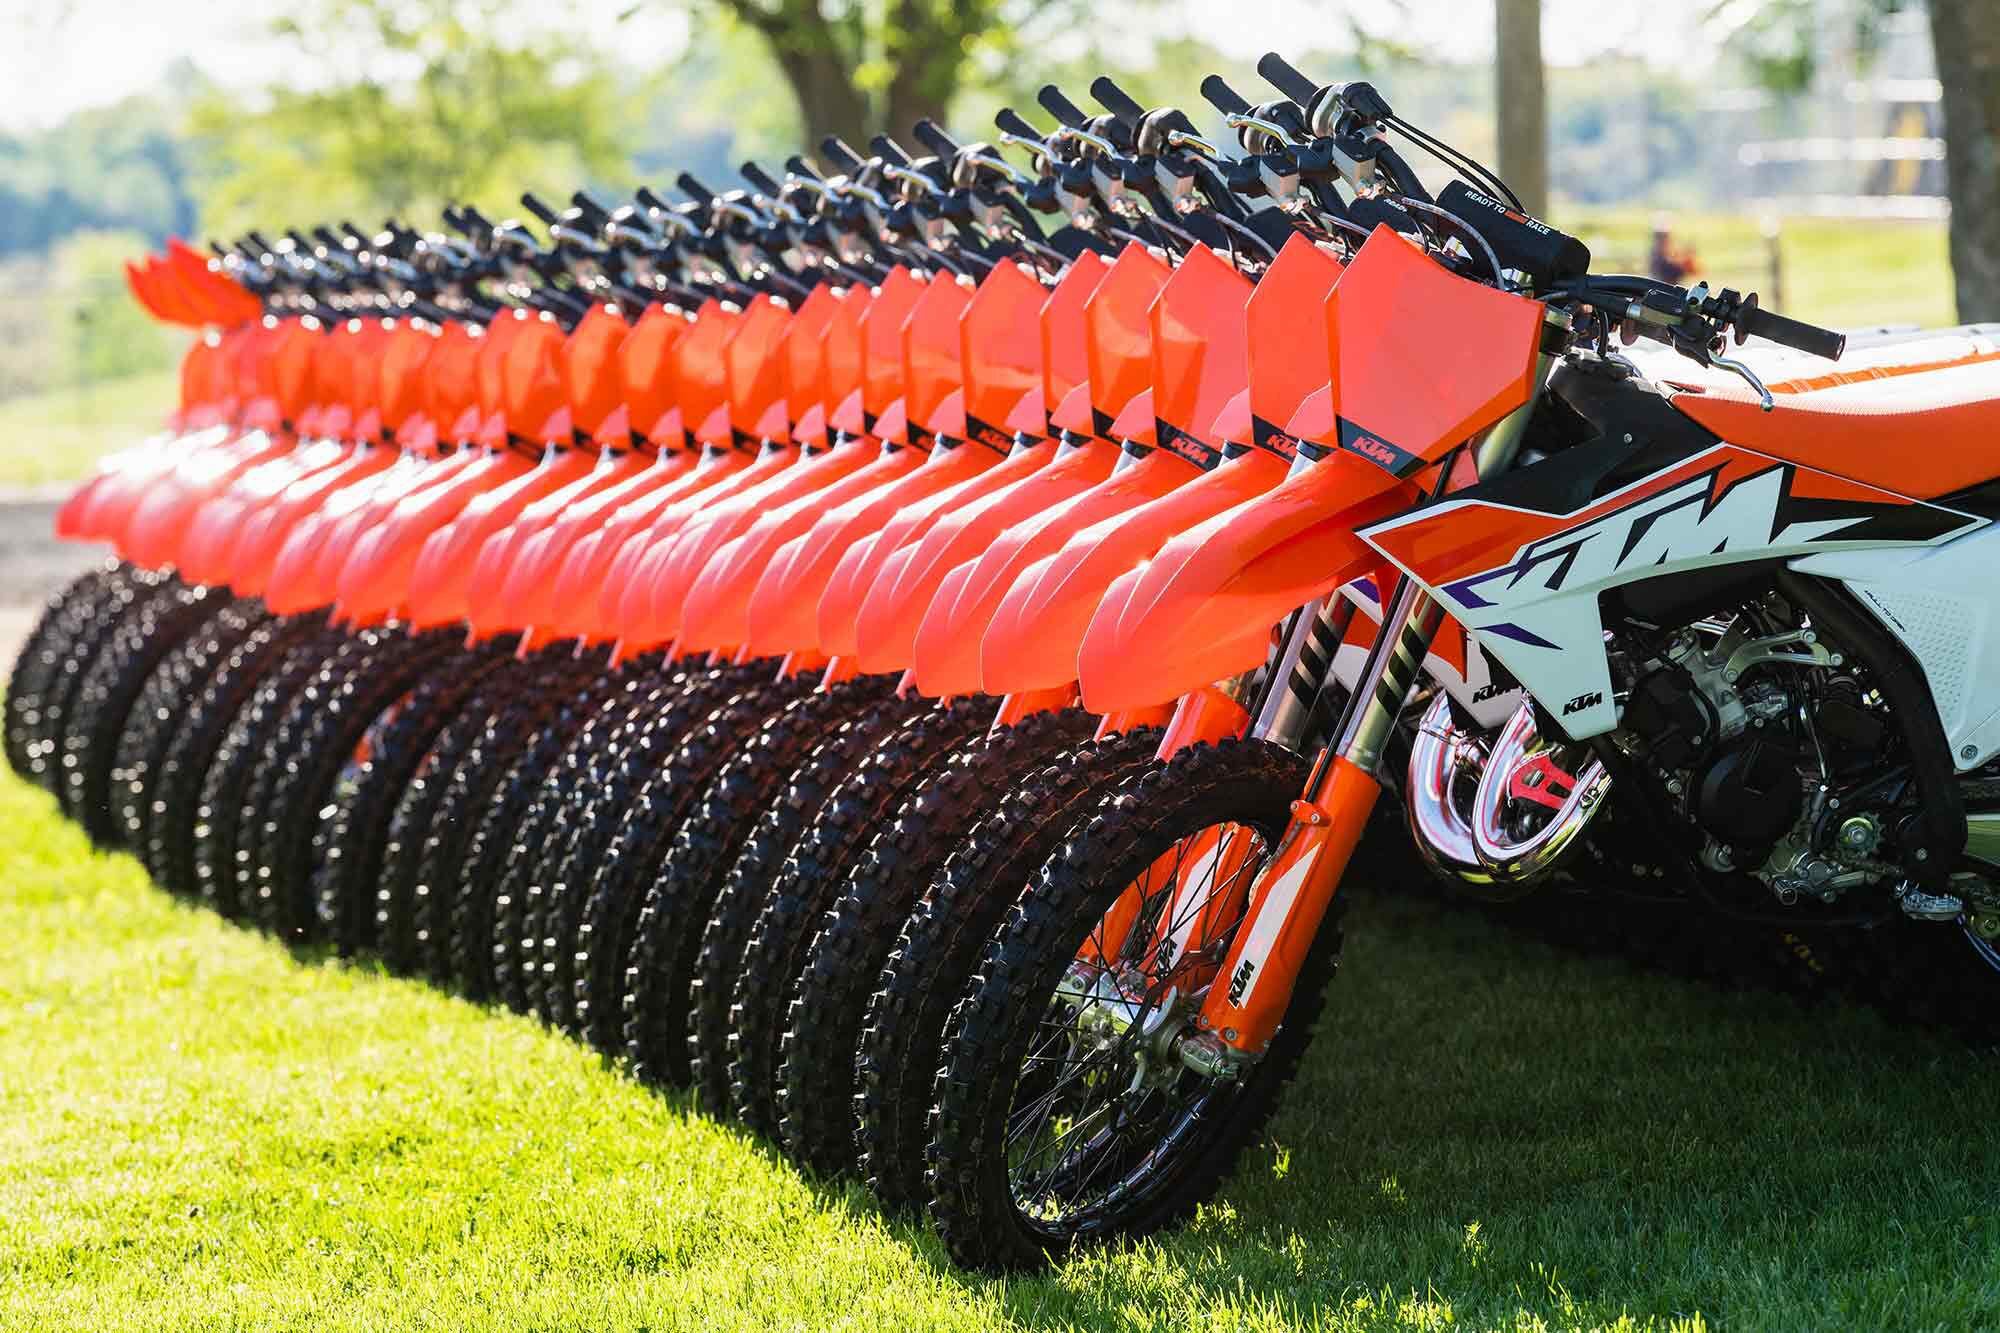 2023 KTM Motocross and Cross-Country Model Launch Photo Gallery